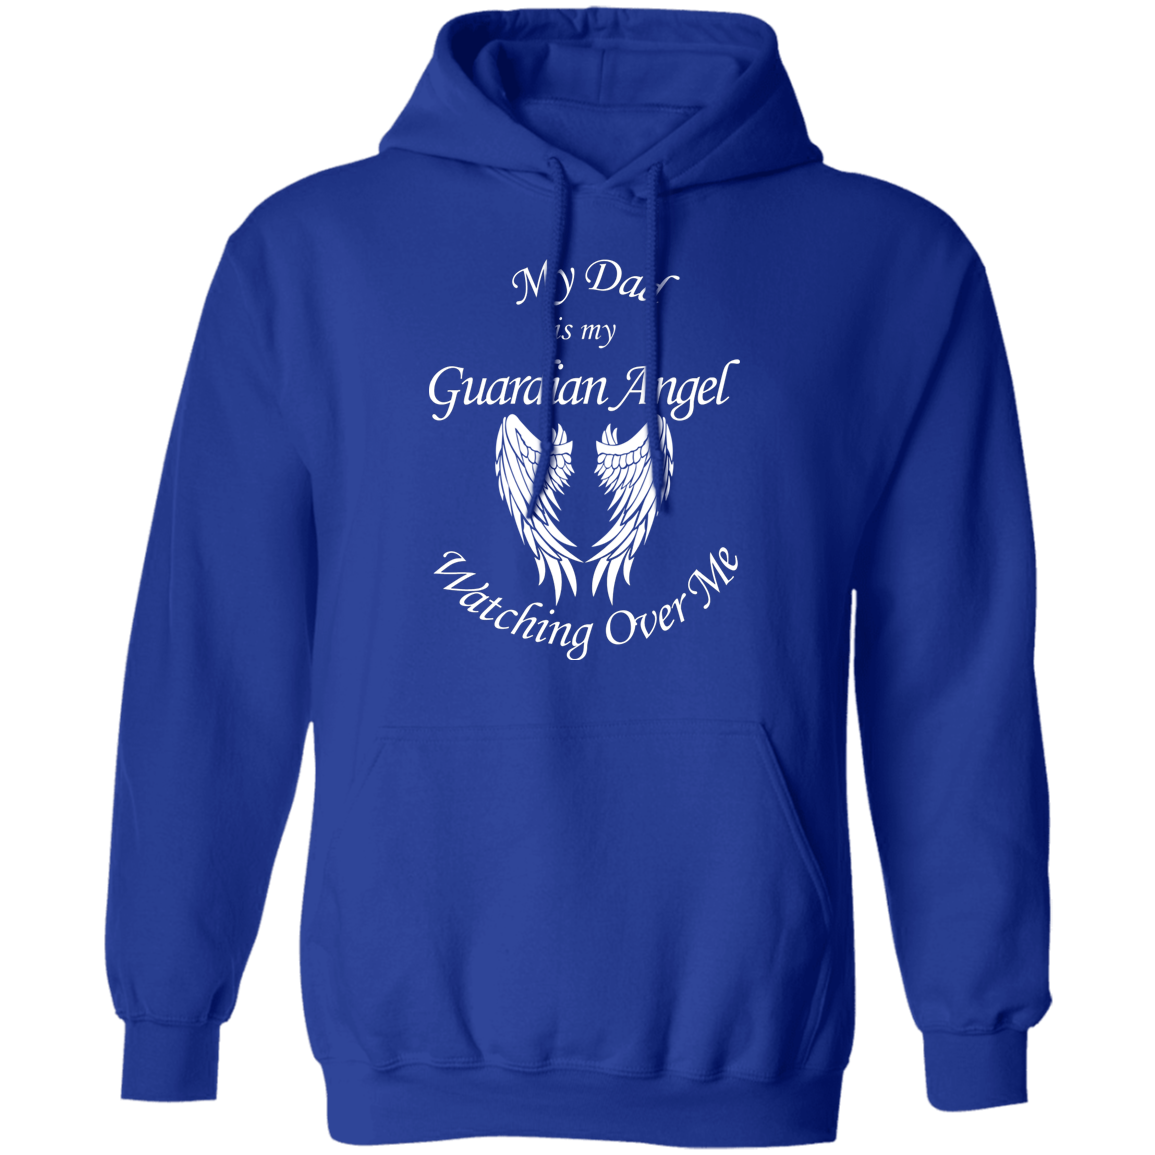 Dad is my Guardian Angel Watching Over Me Apparel